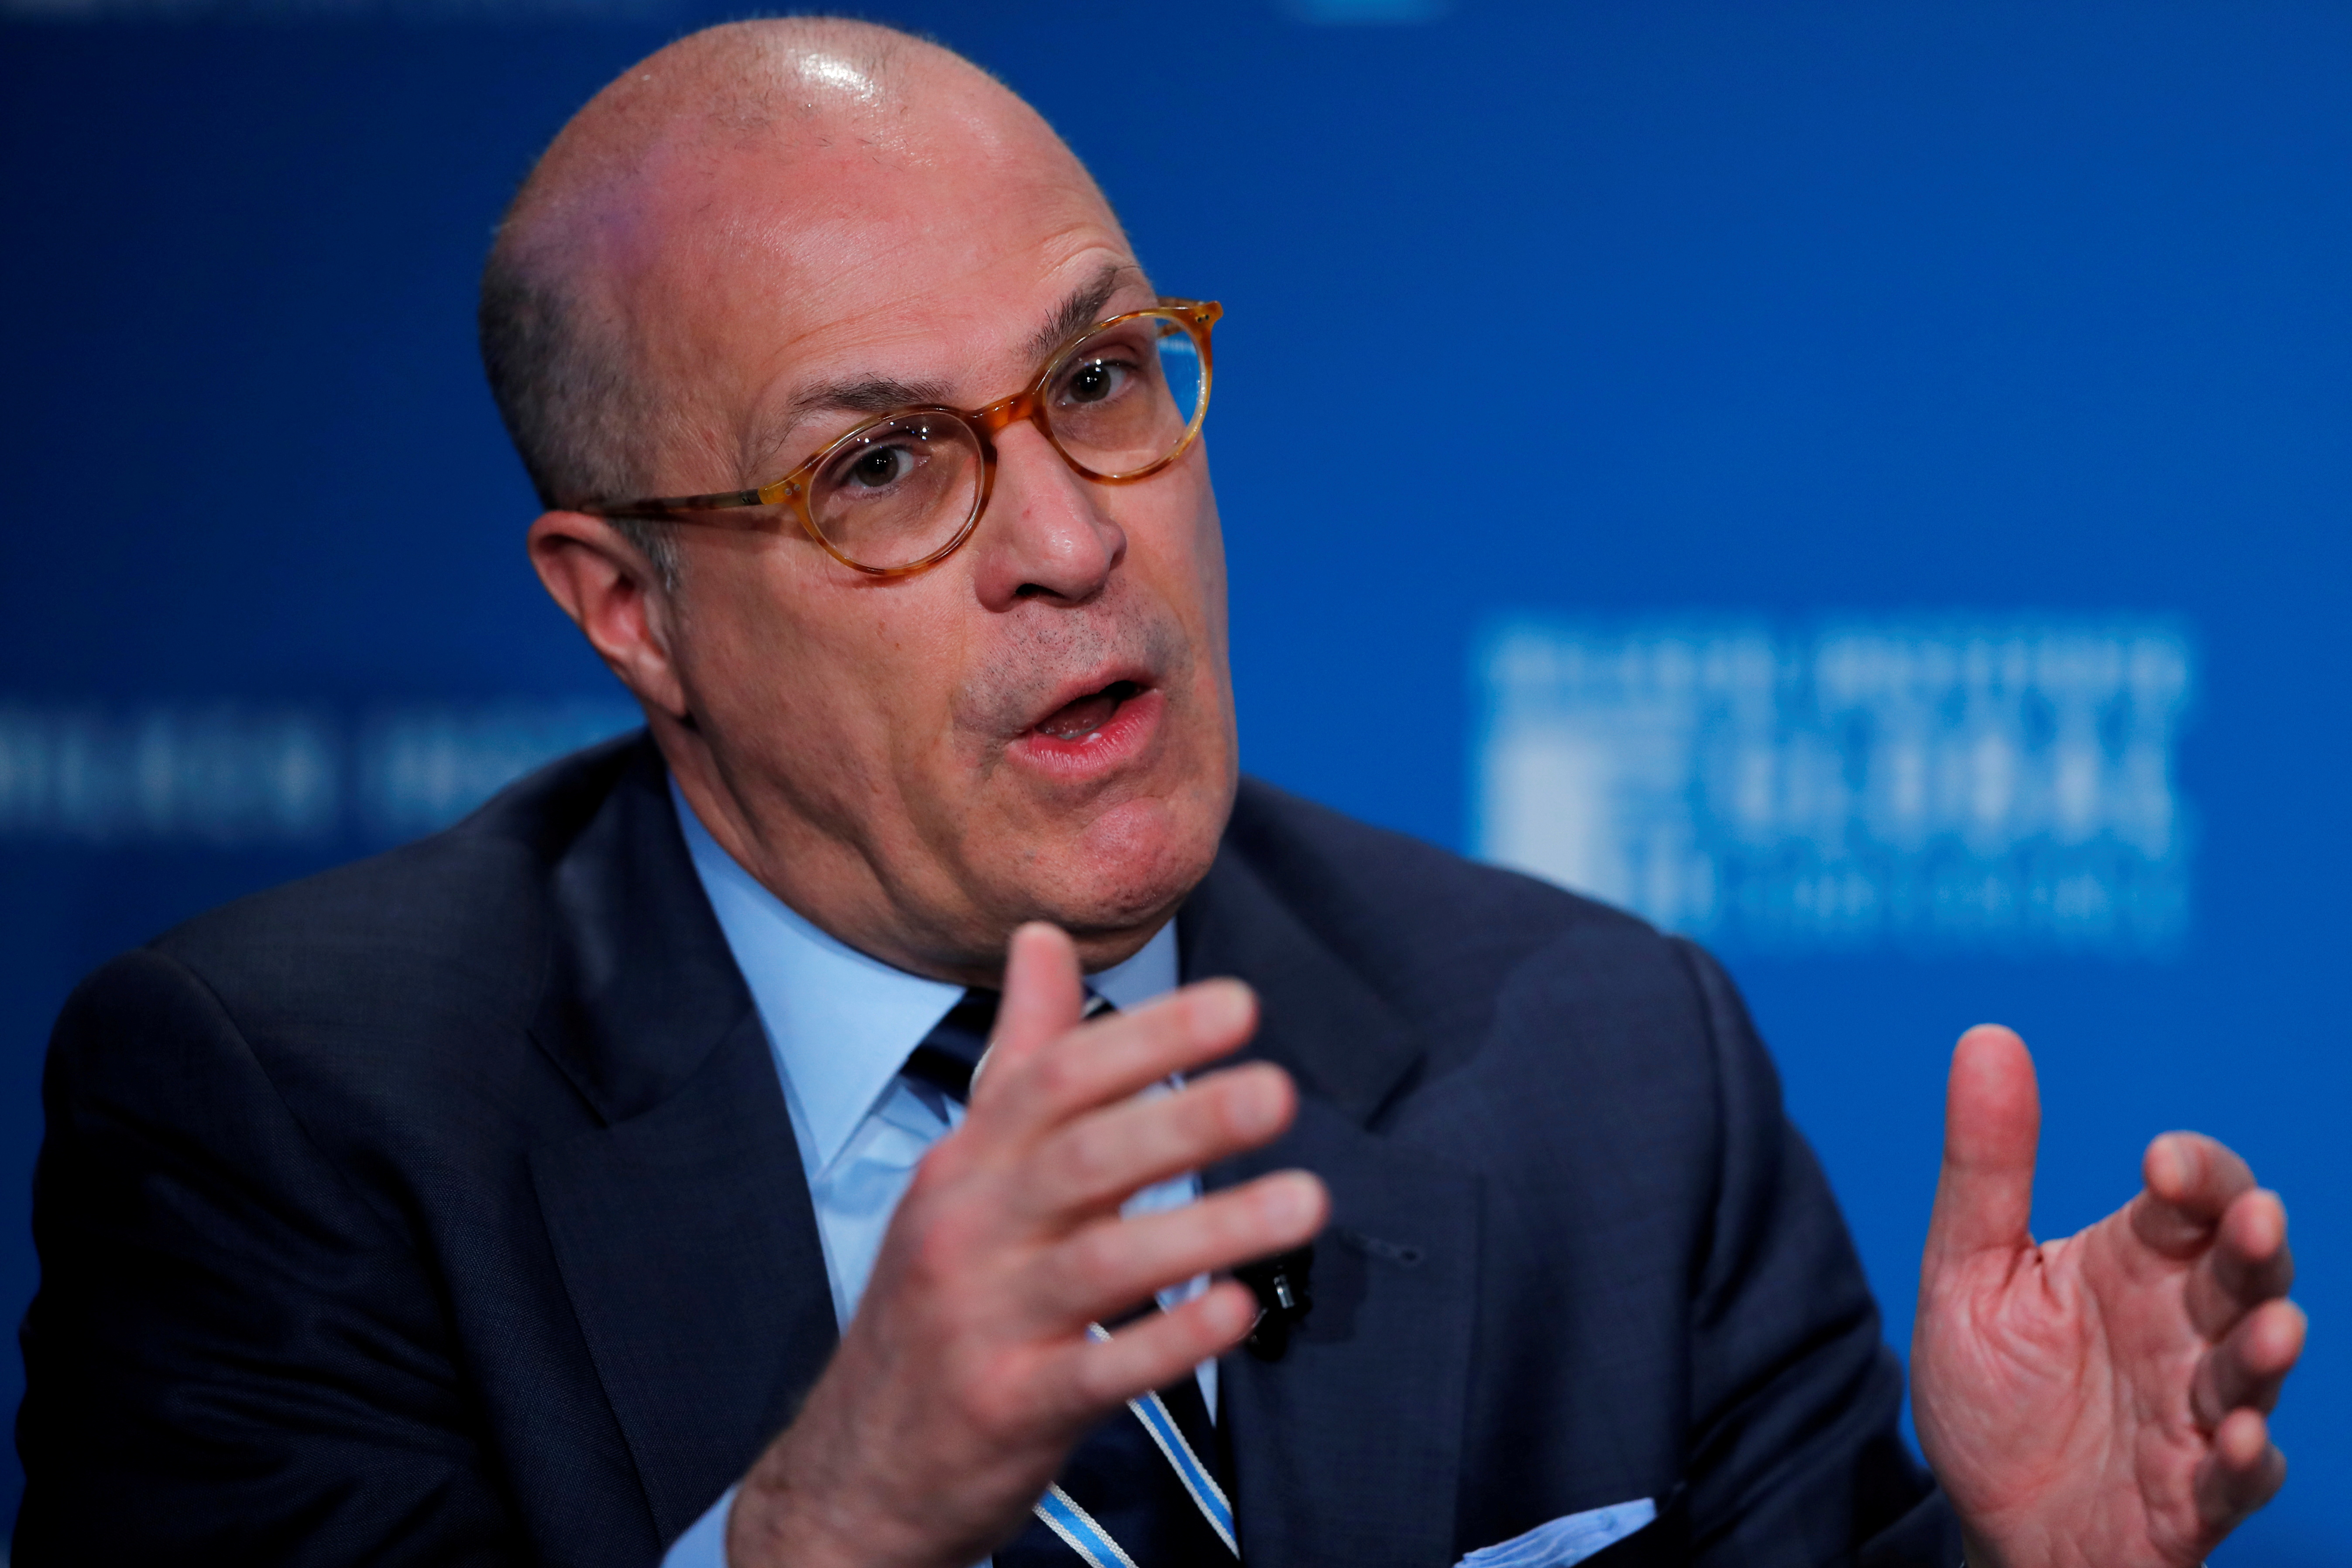 Chairman of the U.S. Commodity Futures Trading Commission Giancarlo speaks at the Milken Institute 21st Global Conference in Beverly Hills